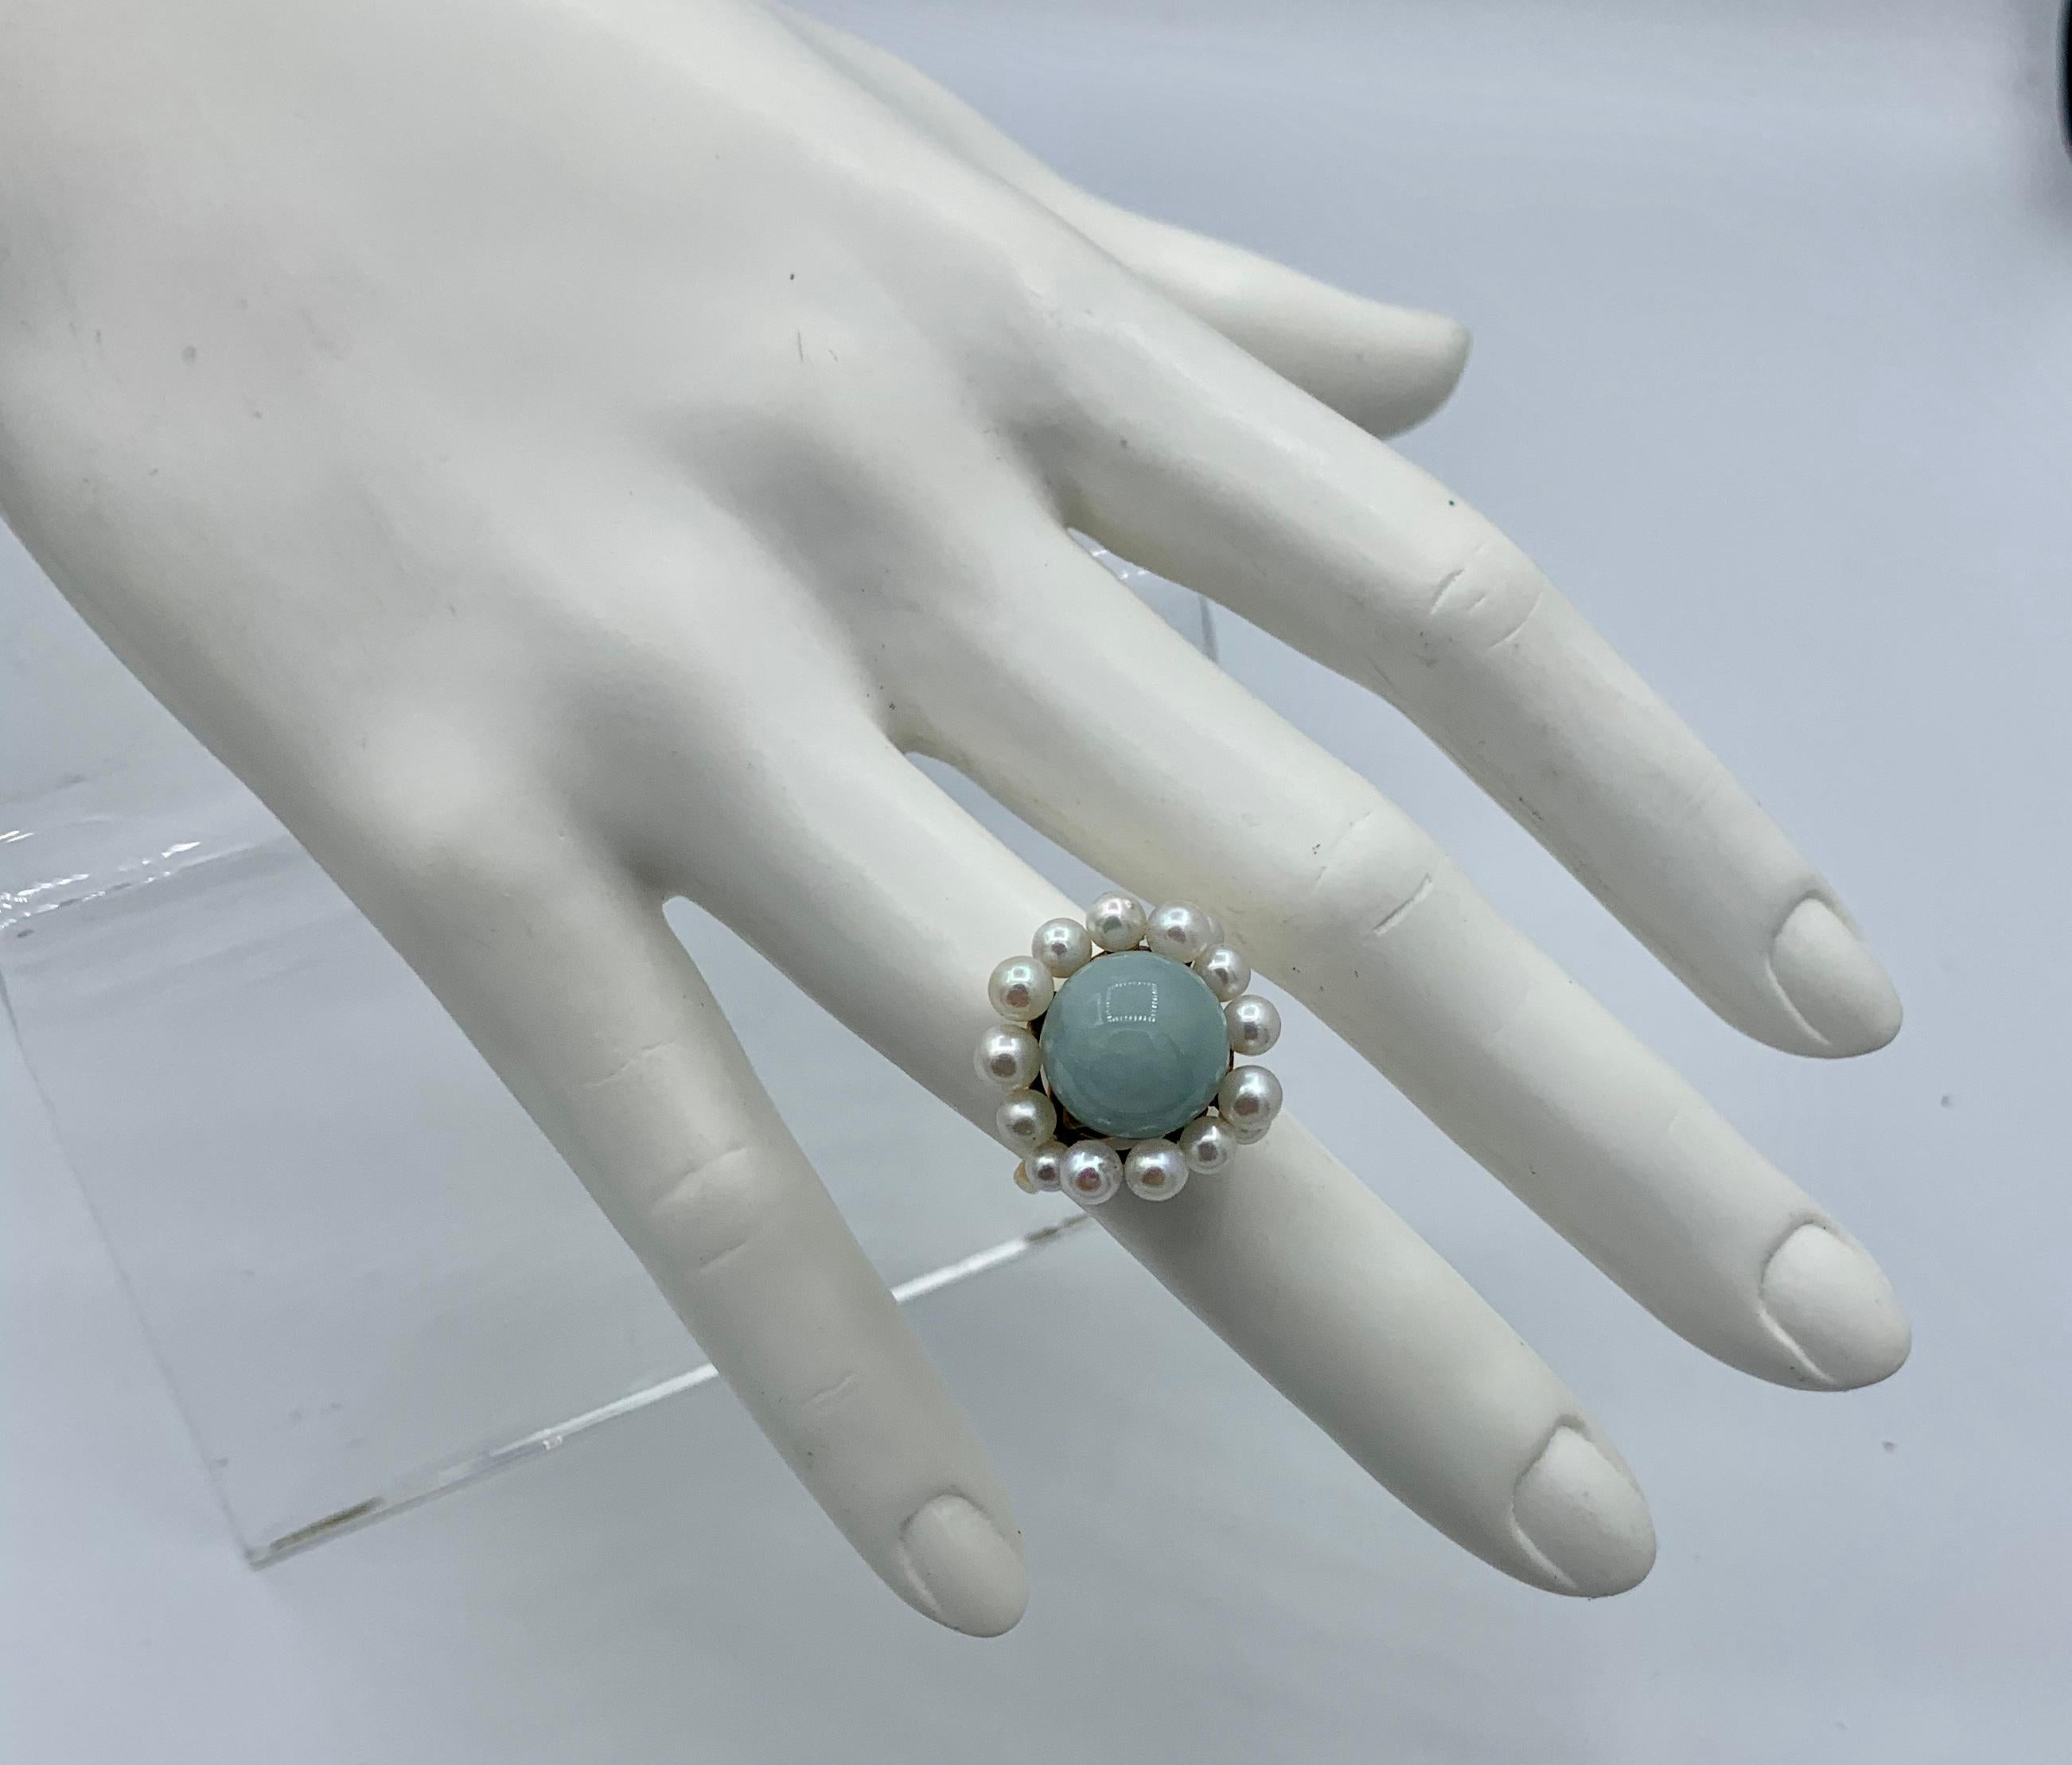 A rare Ming's Jade Ring with a fabulous Pearl Halo in 14 Karat Gold.  The vintage Ming's of Hawaii jade and pearl ring is just exquisite.  The color of the Jade cabochon surrounded by the beautiful white pearls in an undulating design around the